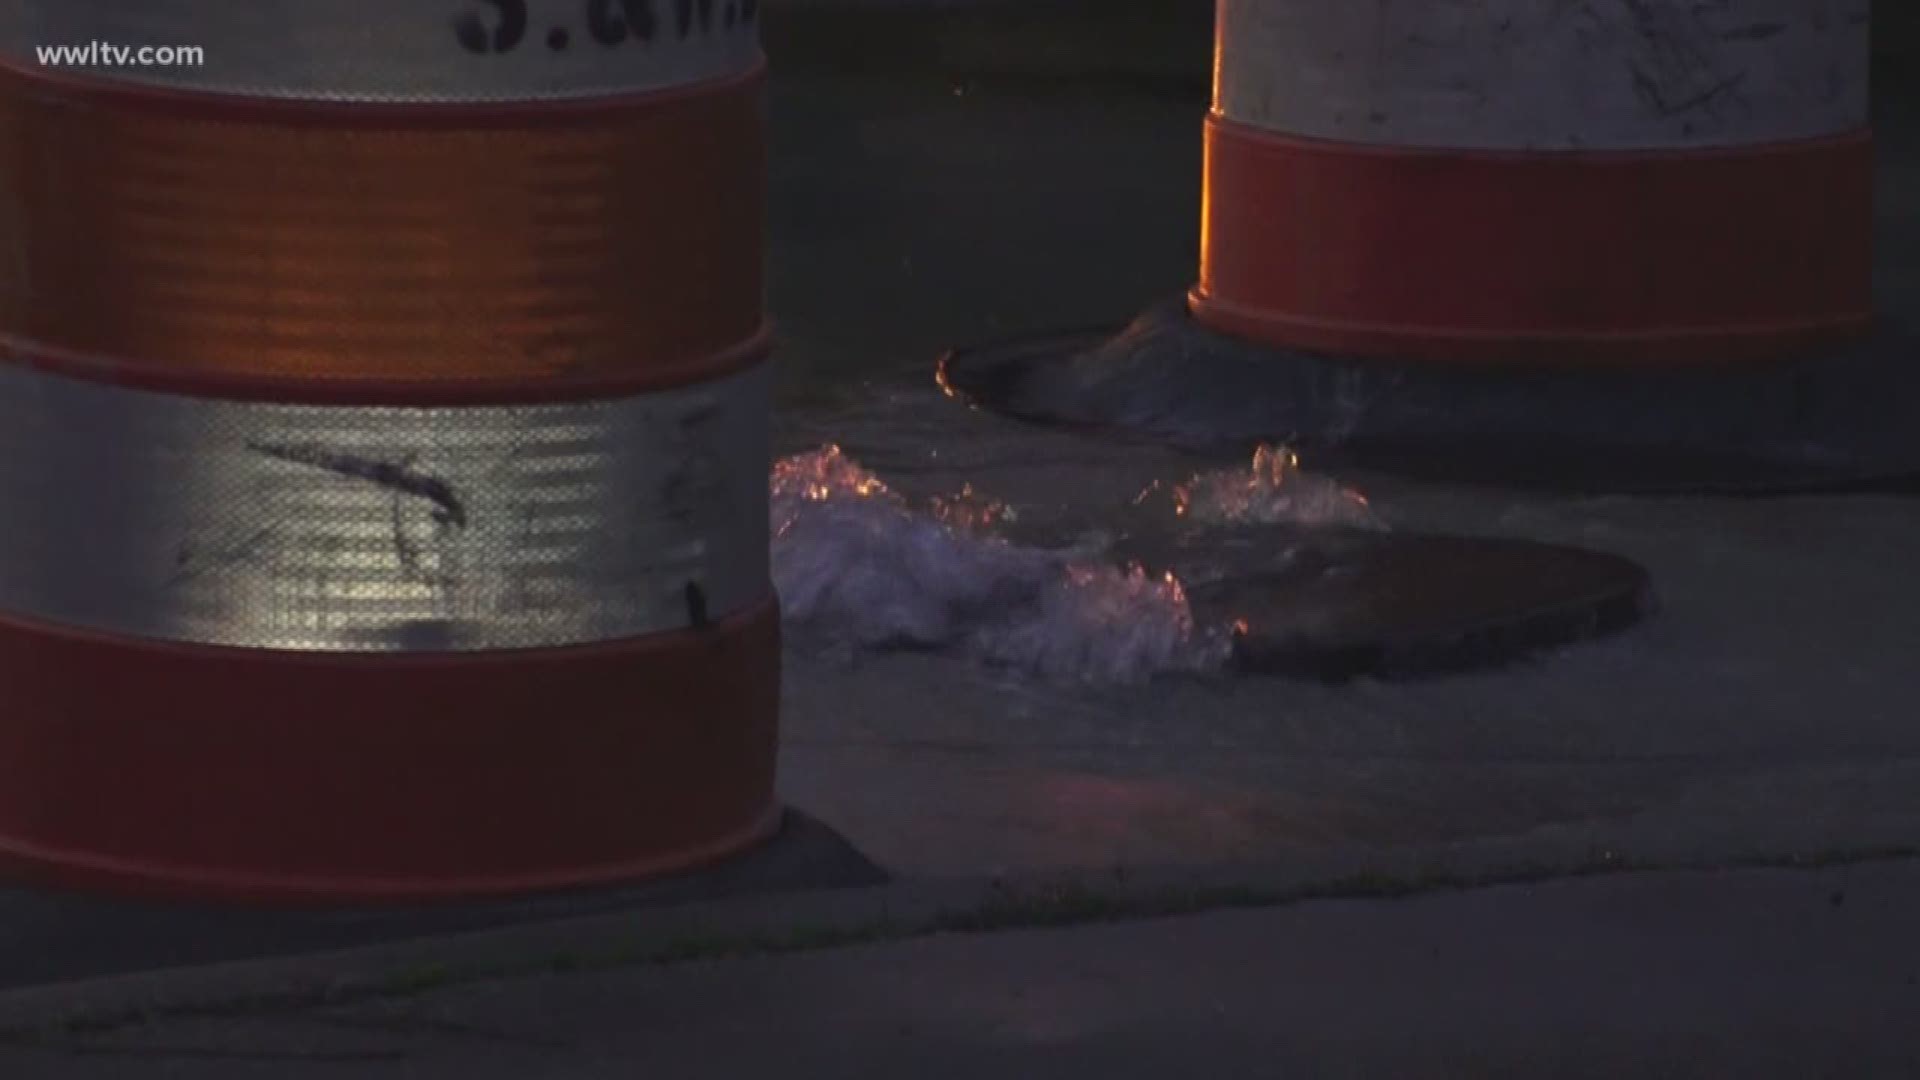 Eyewitness News has covered multiple stories about large water leaks in New Orleans, but this one happened across from the Sewerage and Water Board plant near Claiborne.